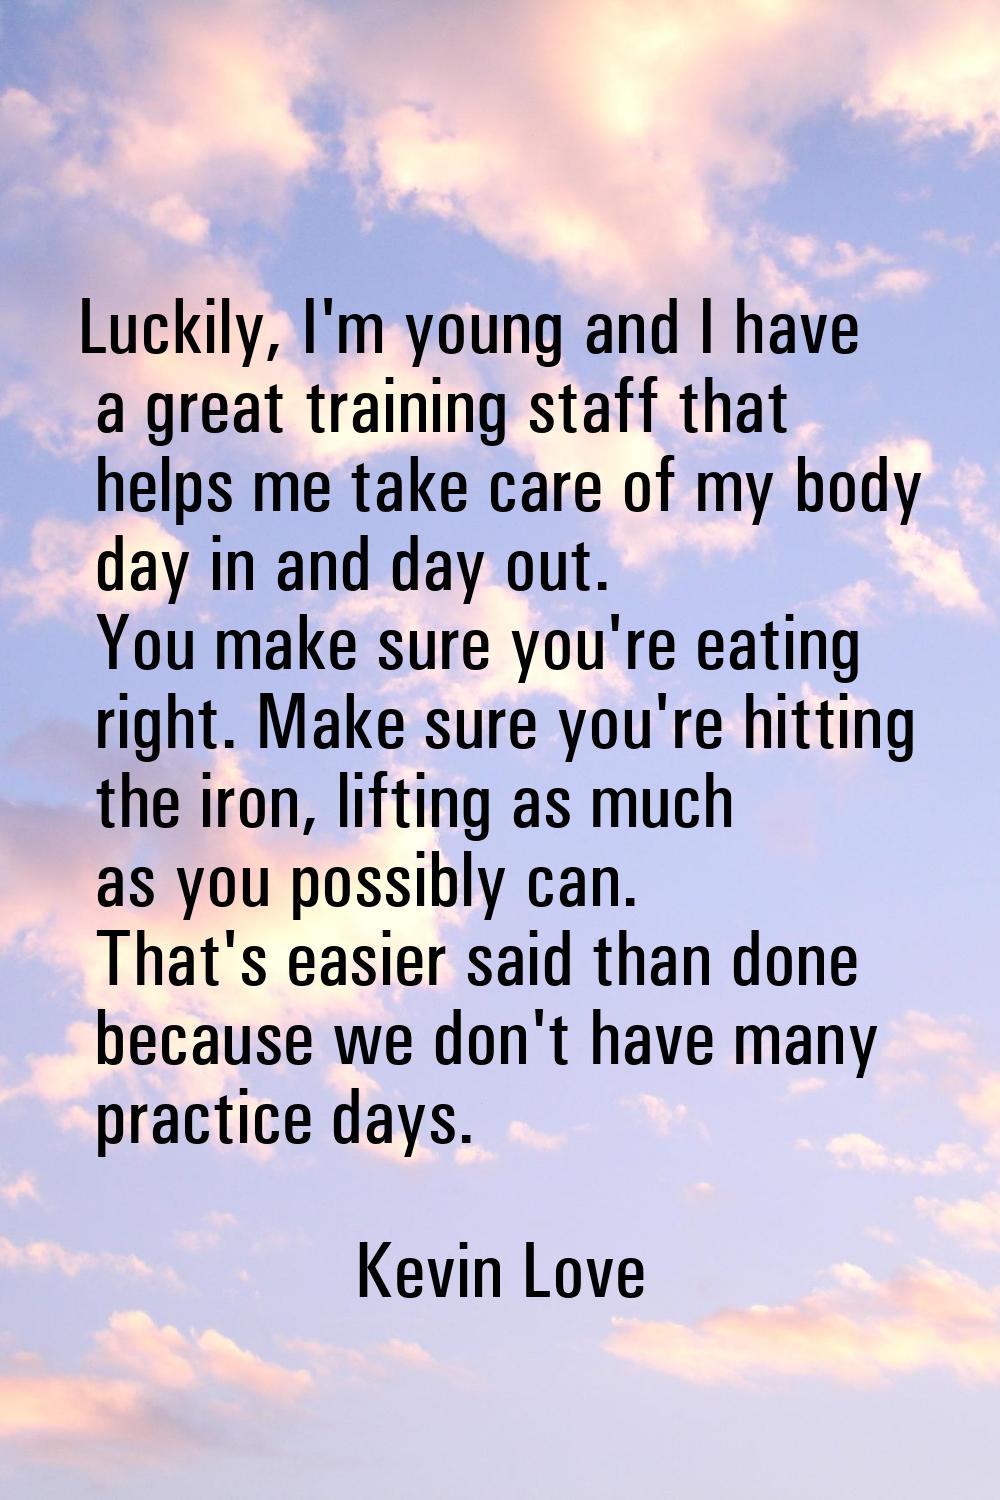 Luckily, I'm young and I have a great training staff that helps me take care of my body day in and 